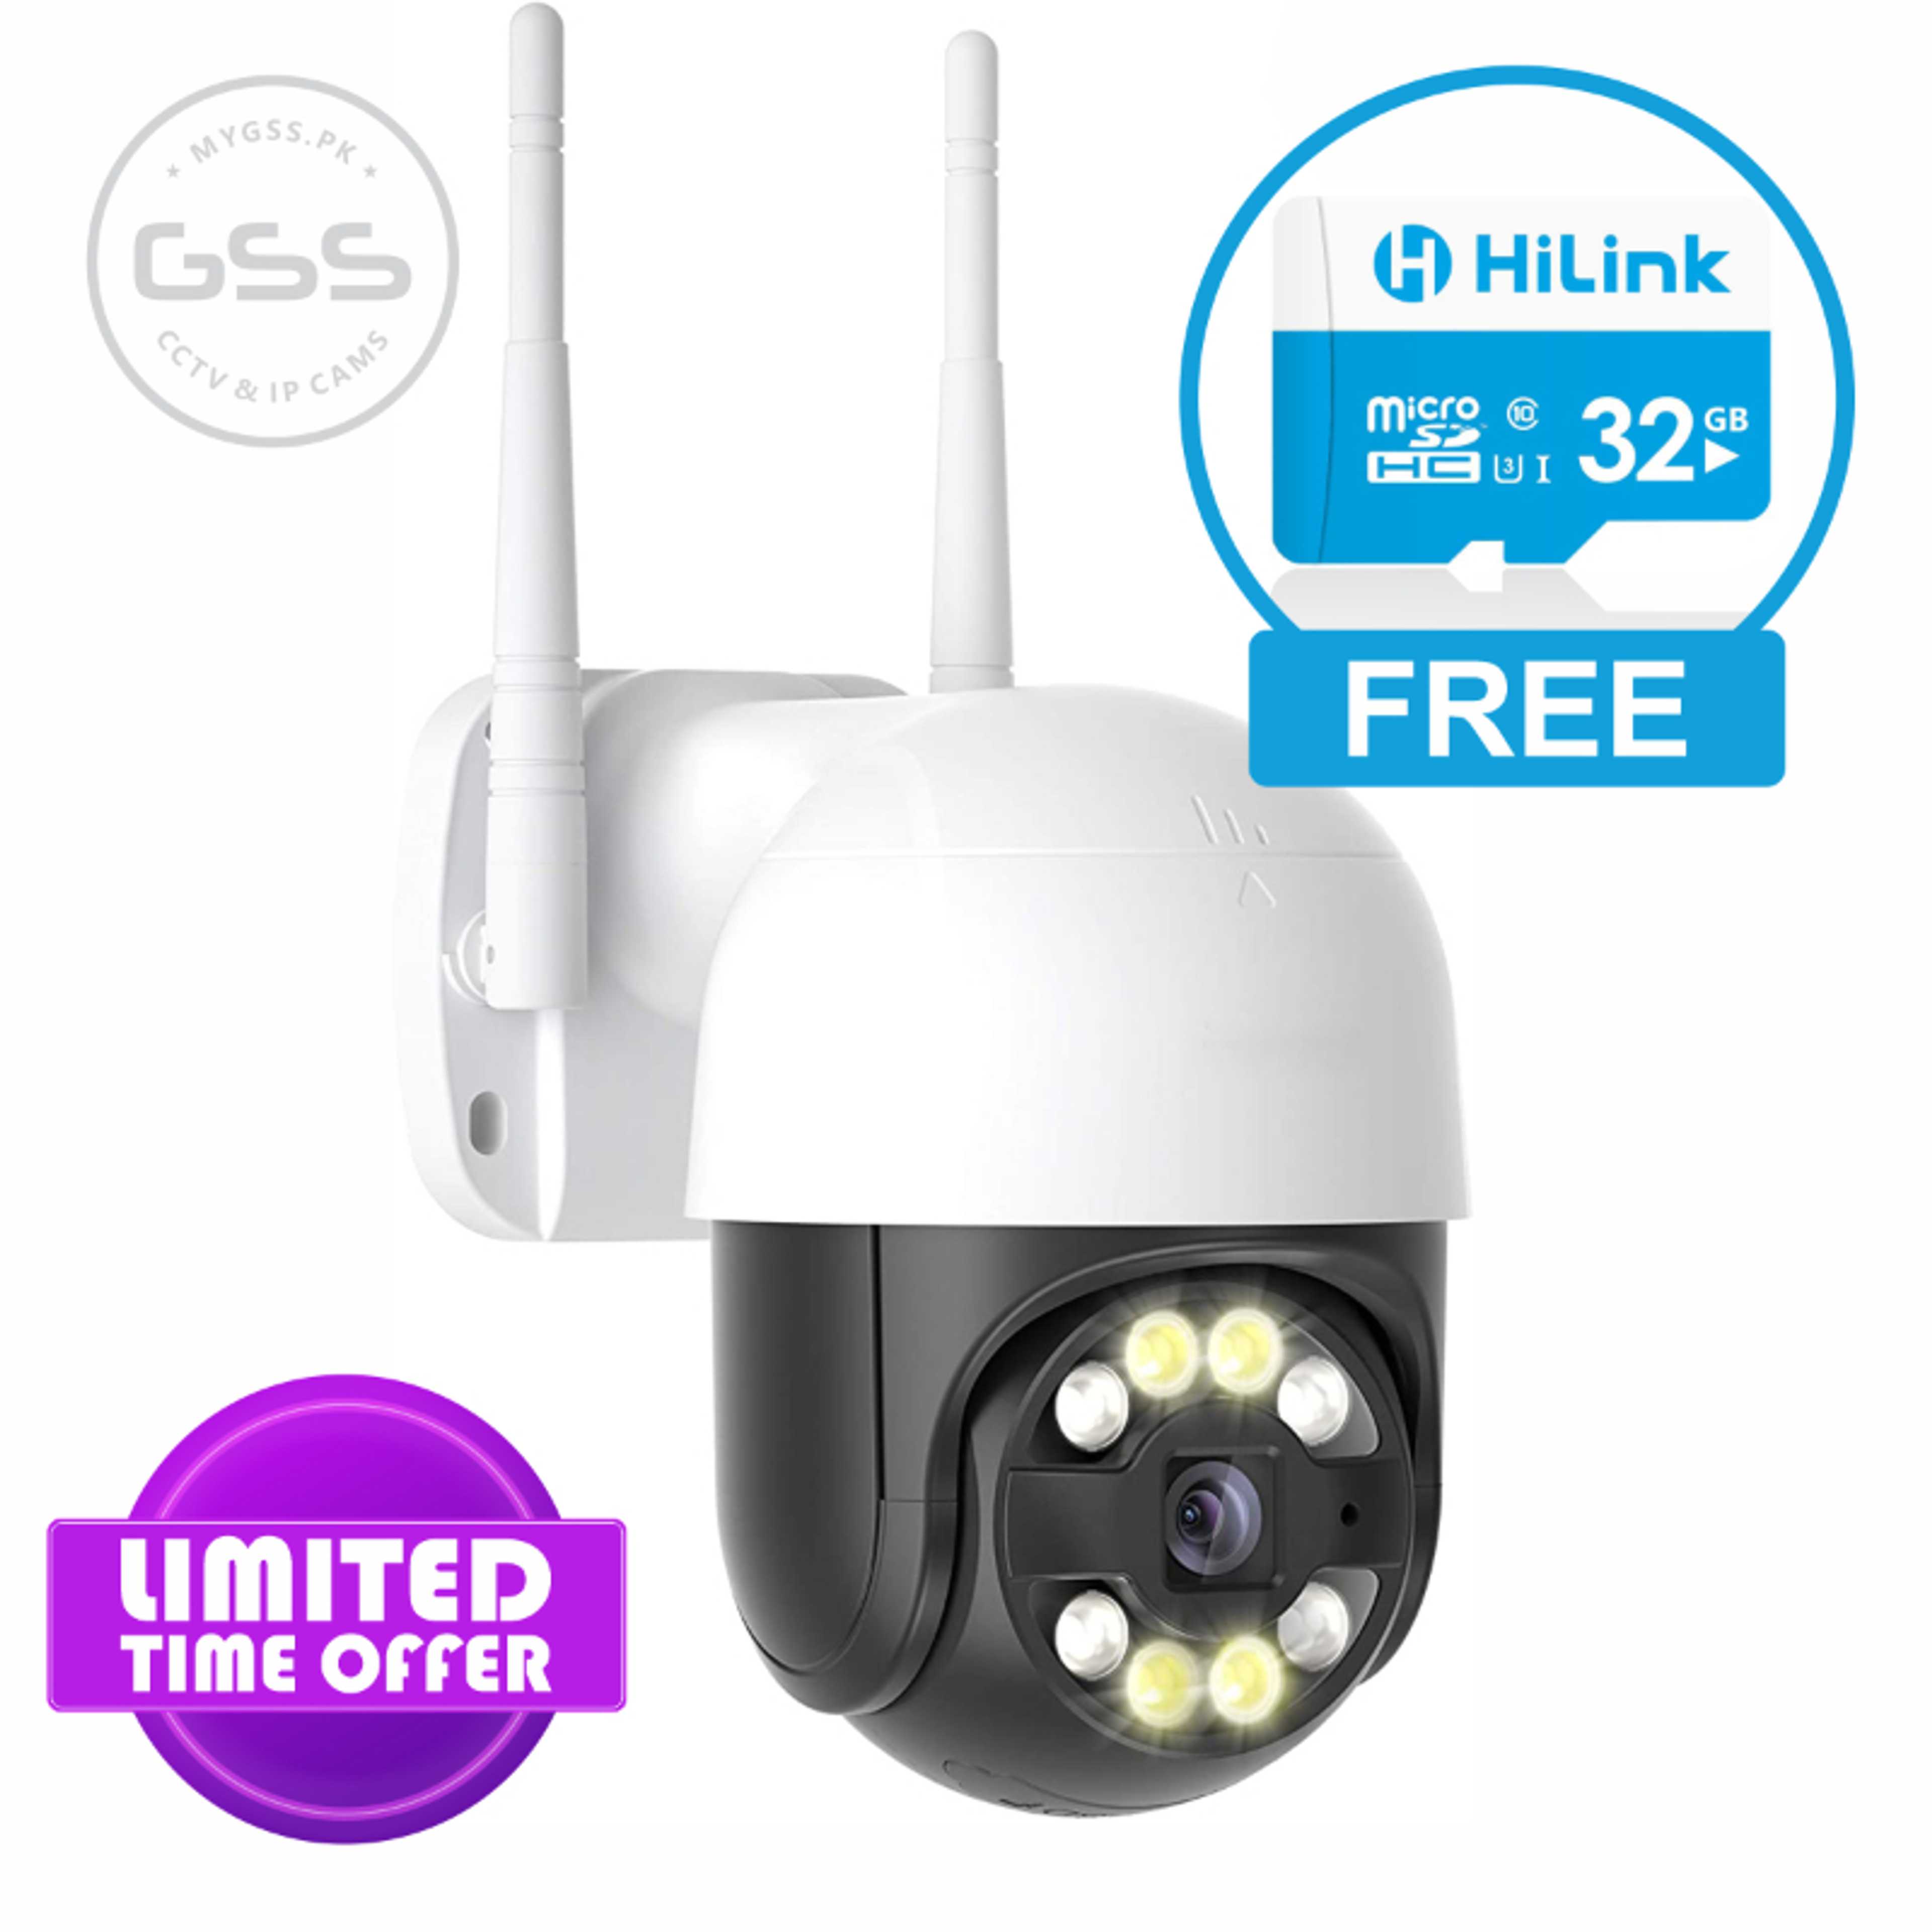 Outdoor 1080P PTZ IP Wireless Security Camera, Dome 360, WiFi CCTV Surveillance Camera, Pan / Tilt - Weatherproof - Night Vision - LED Lights - Two Way Audio - Motion Detection - SD Card Slot - V380 (White)